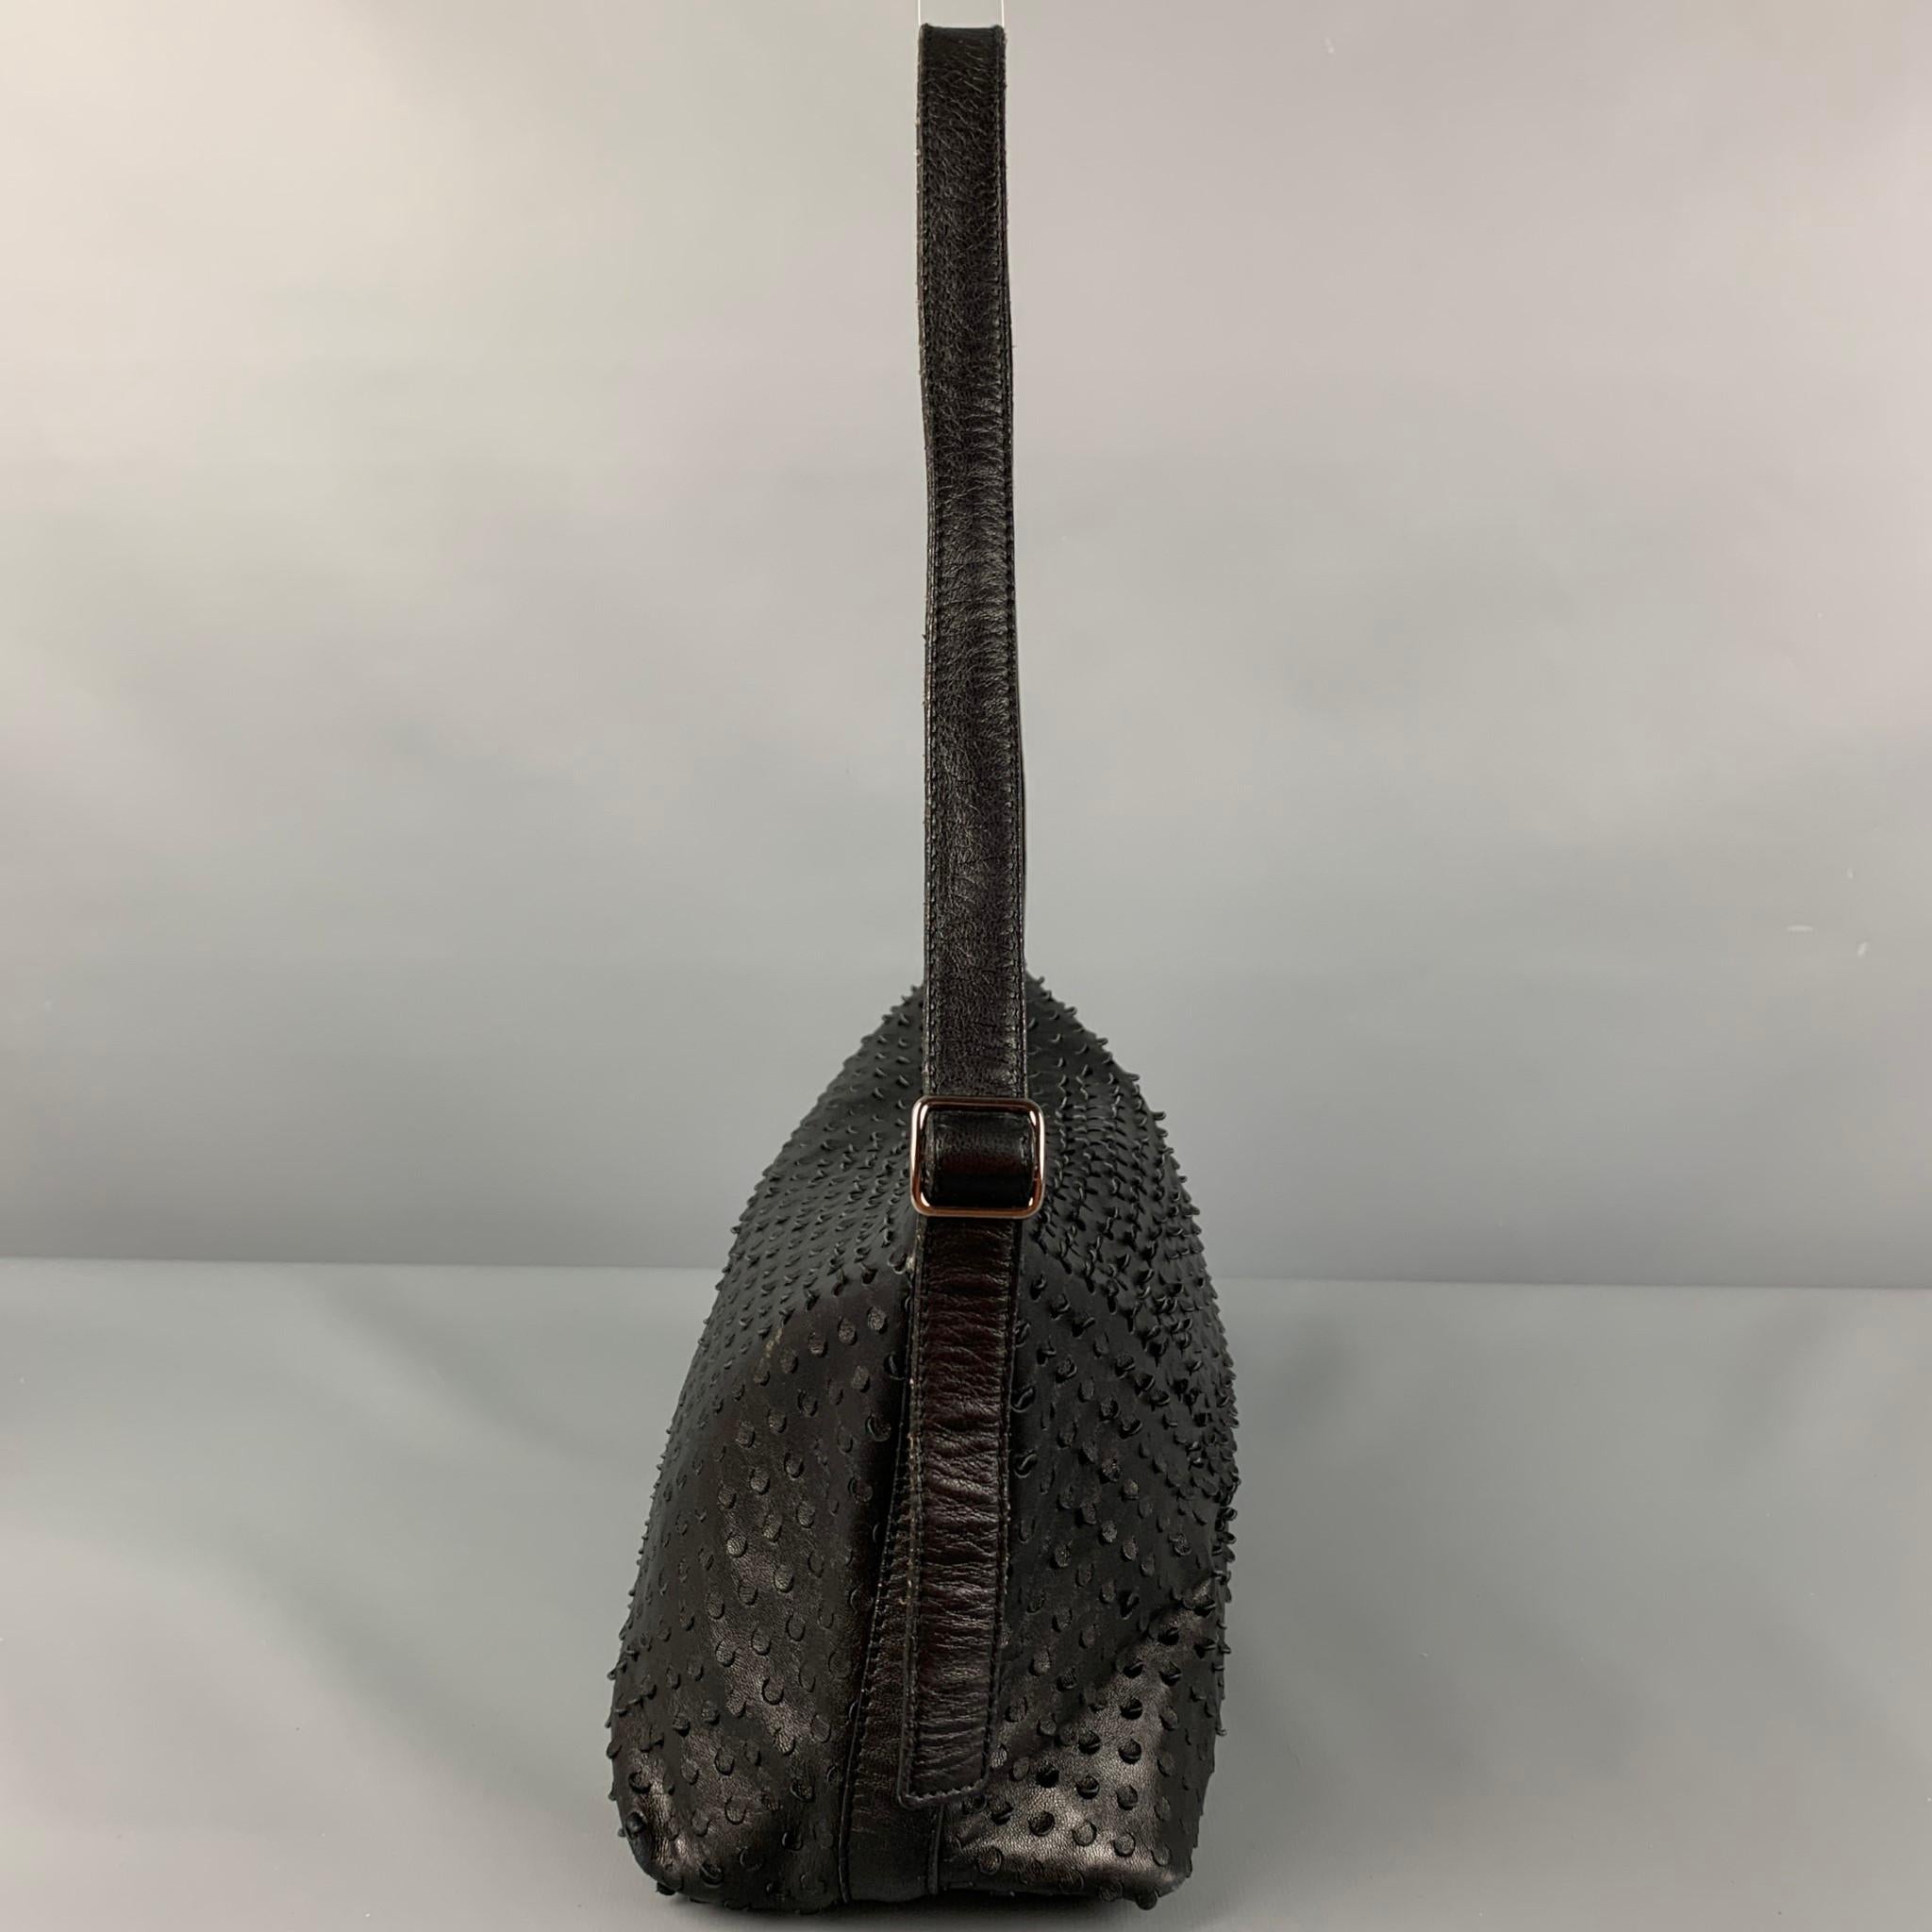 Vintage HELMUT LANG bag comes in a black perforated leather featuring a top handle, inner pocket, and a top zipper closure. Made in Italy. 

Good Pre-Owned Condition. Light wear at handle. As-Is.

Measurements:

Length: 9 in.
Width: 3.5 in.
Height: